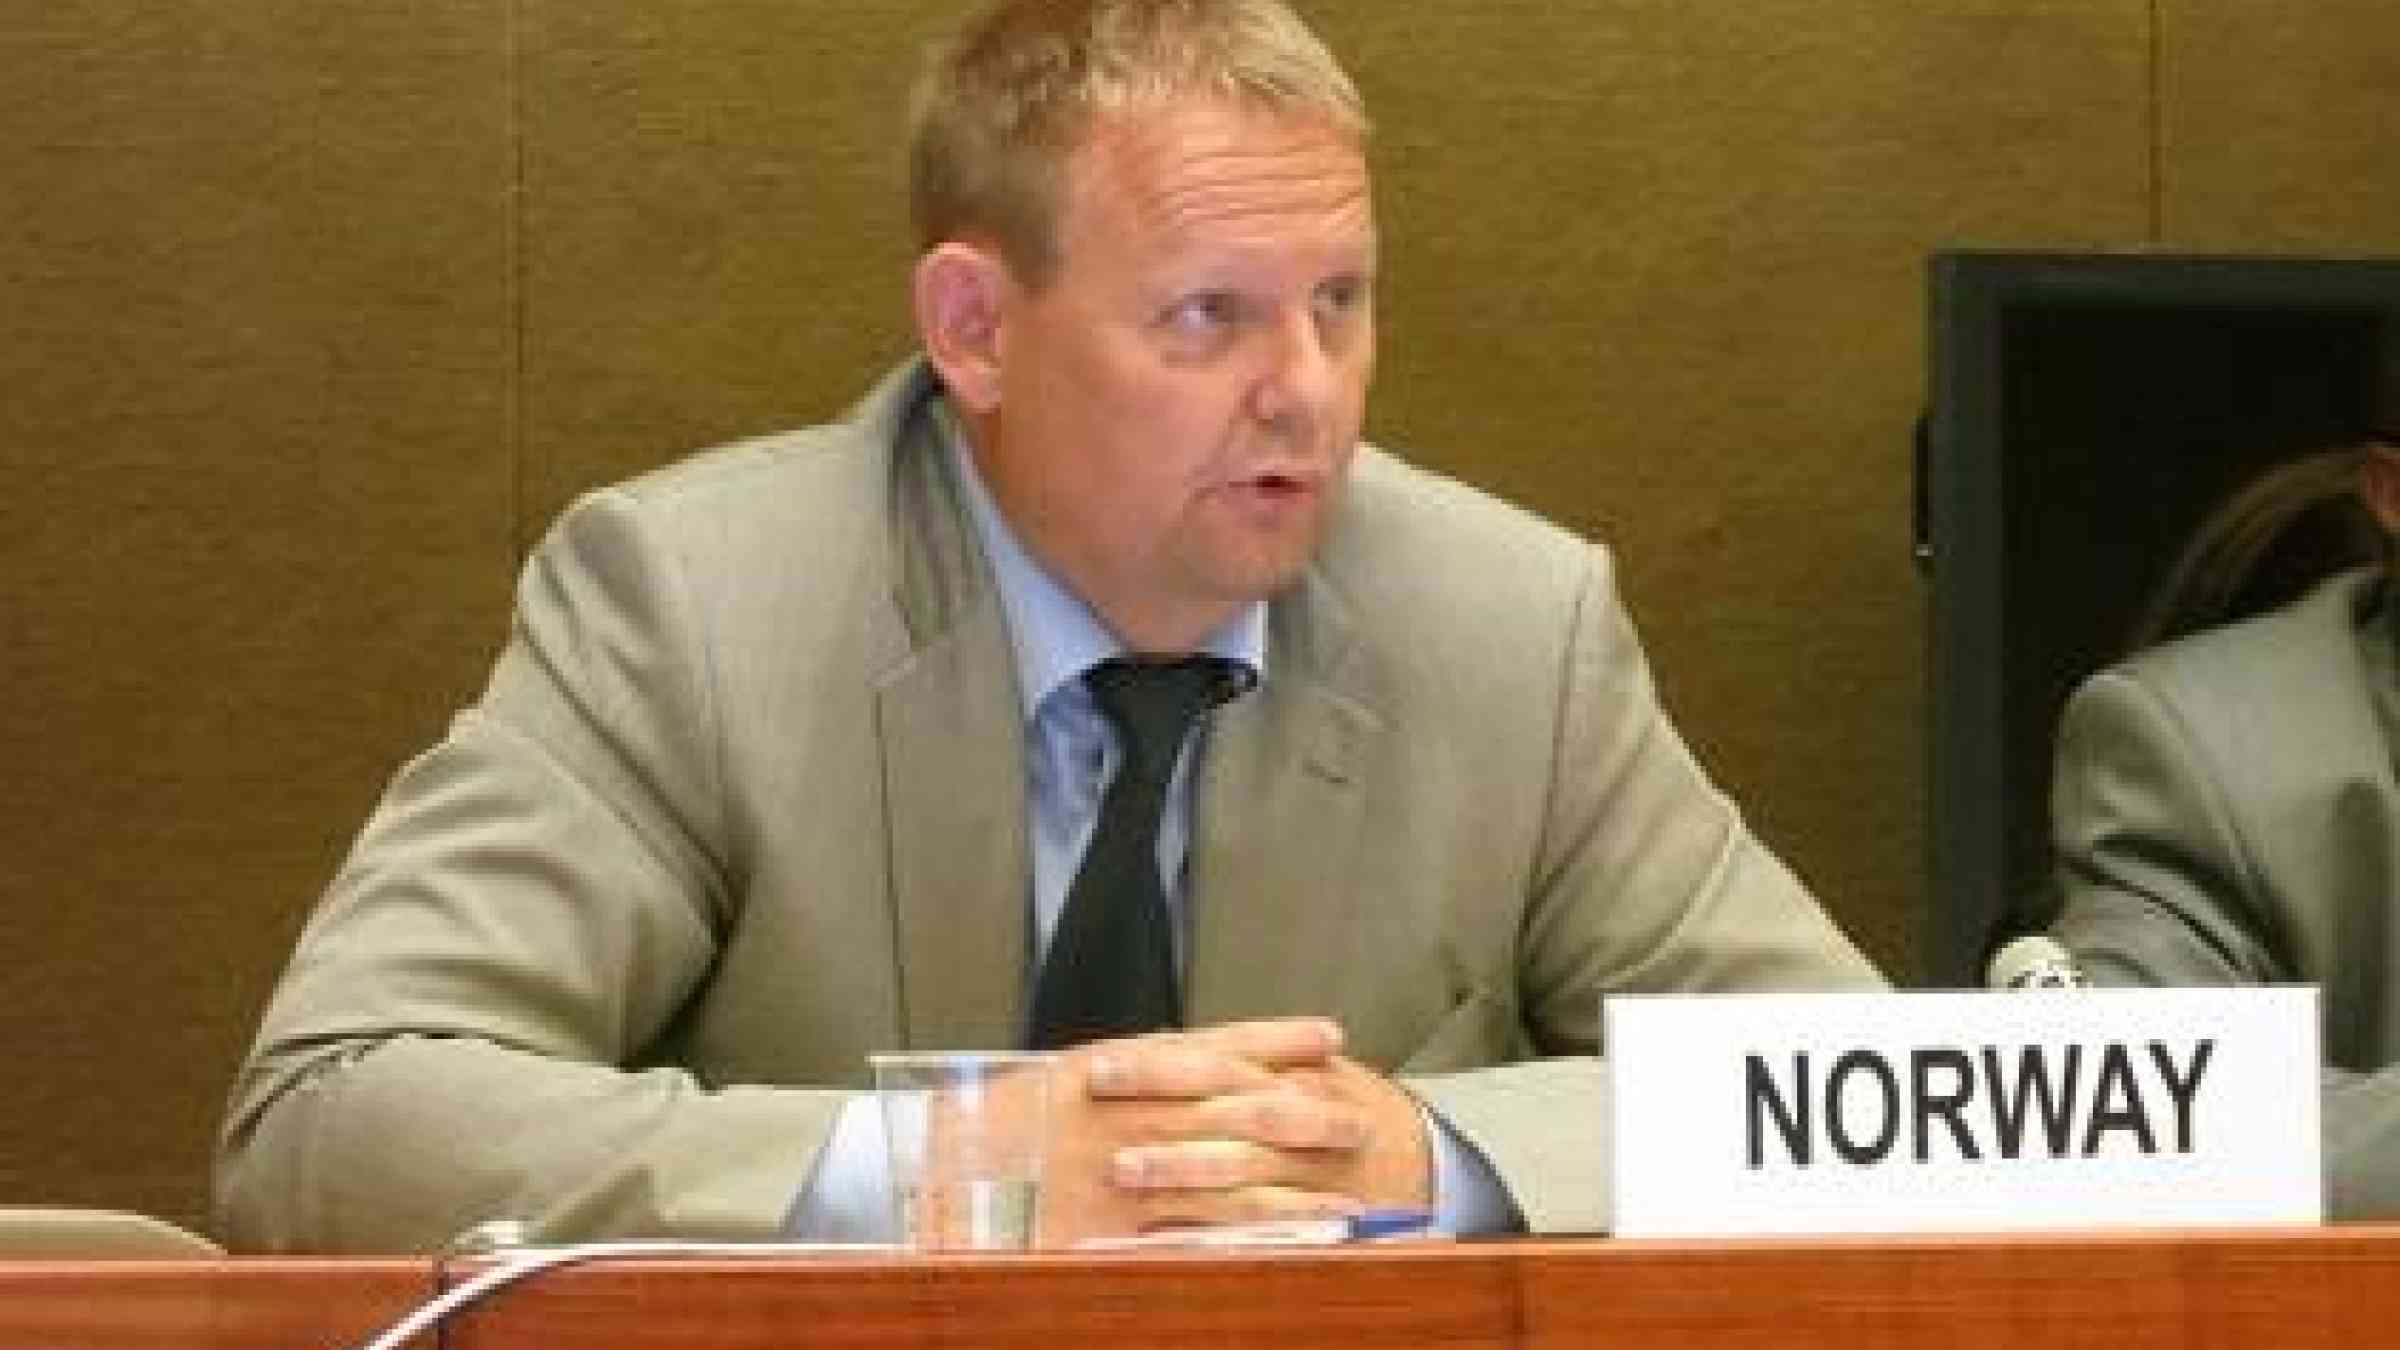 Erling Kvernevik, Senior Advisor at the Norwegian Directorate for Civil Protection speaking today at the First Preparatory Committee Meeting for the Third UN World Conference on Disaster Risk Reduction.